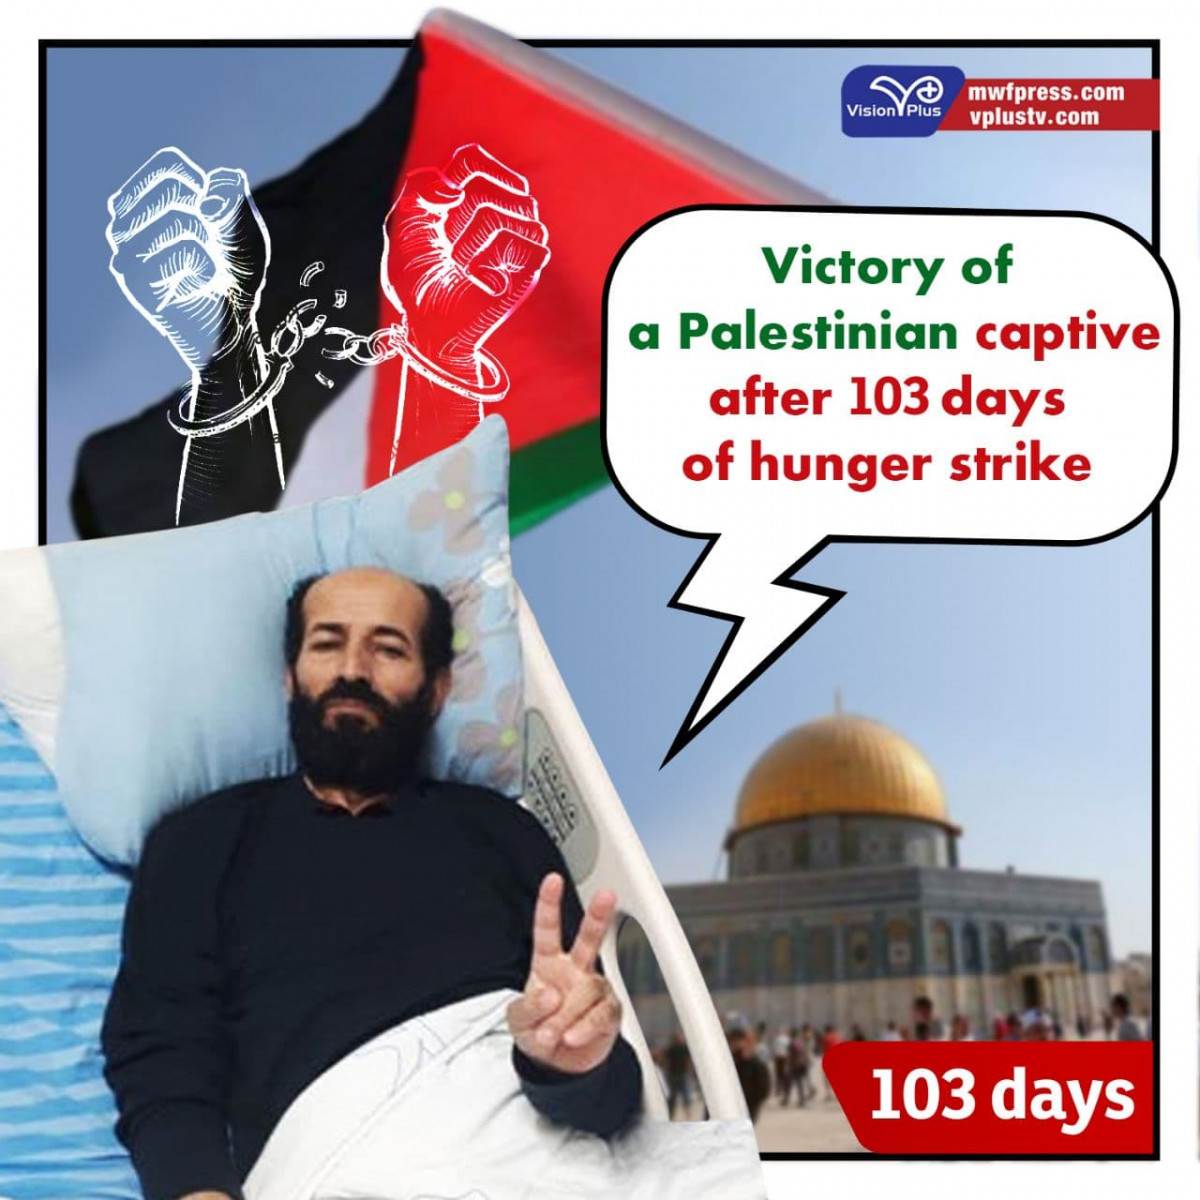 Victory of a Palestinian captive after 103 days of hunger strike